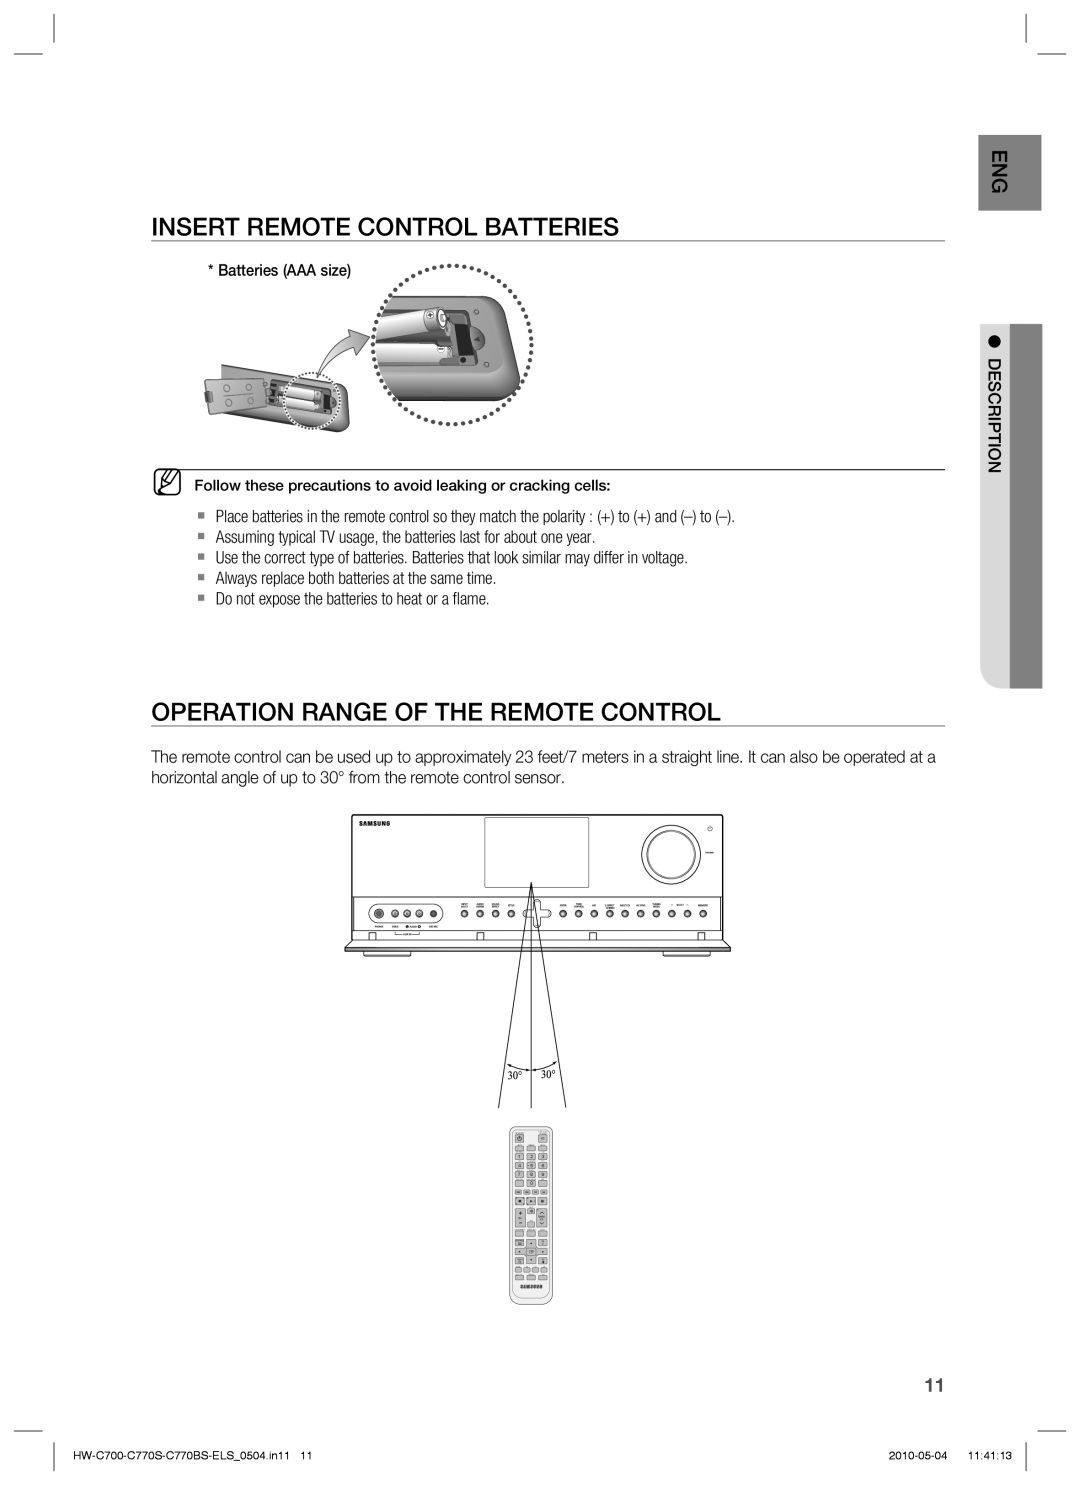 Samsung HW-C700/XEN manual Insert Remote Control Batteries, Operation Range Of The Remote Control, Batteries AAA size 